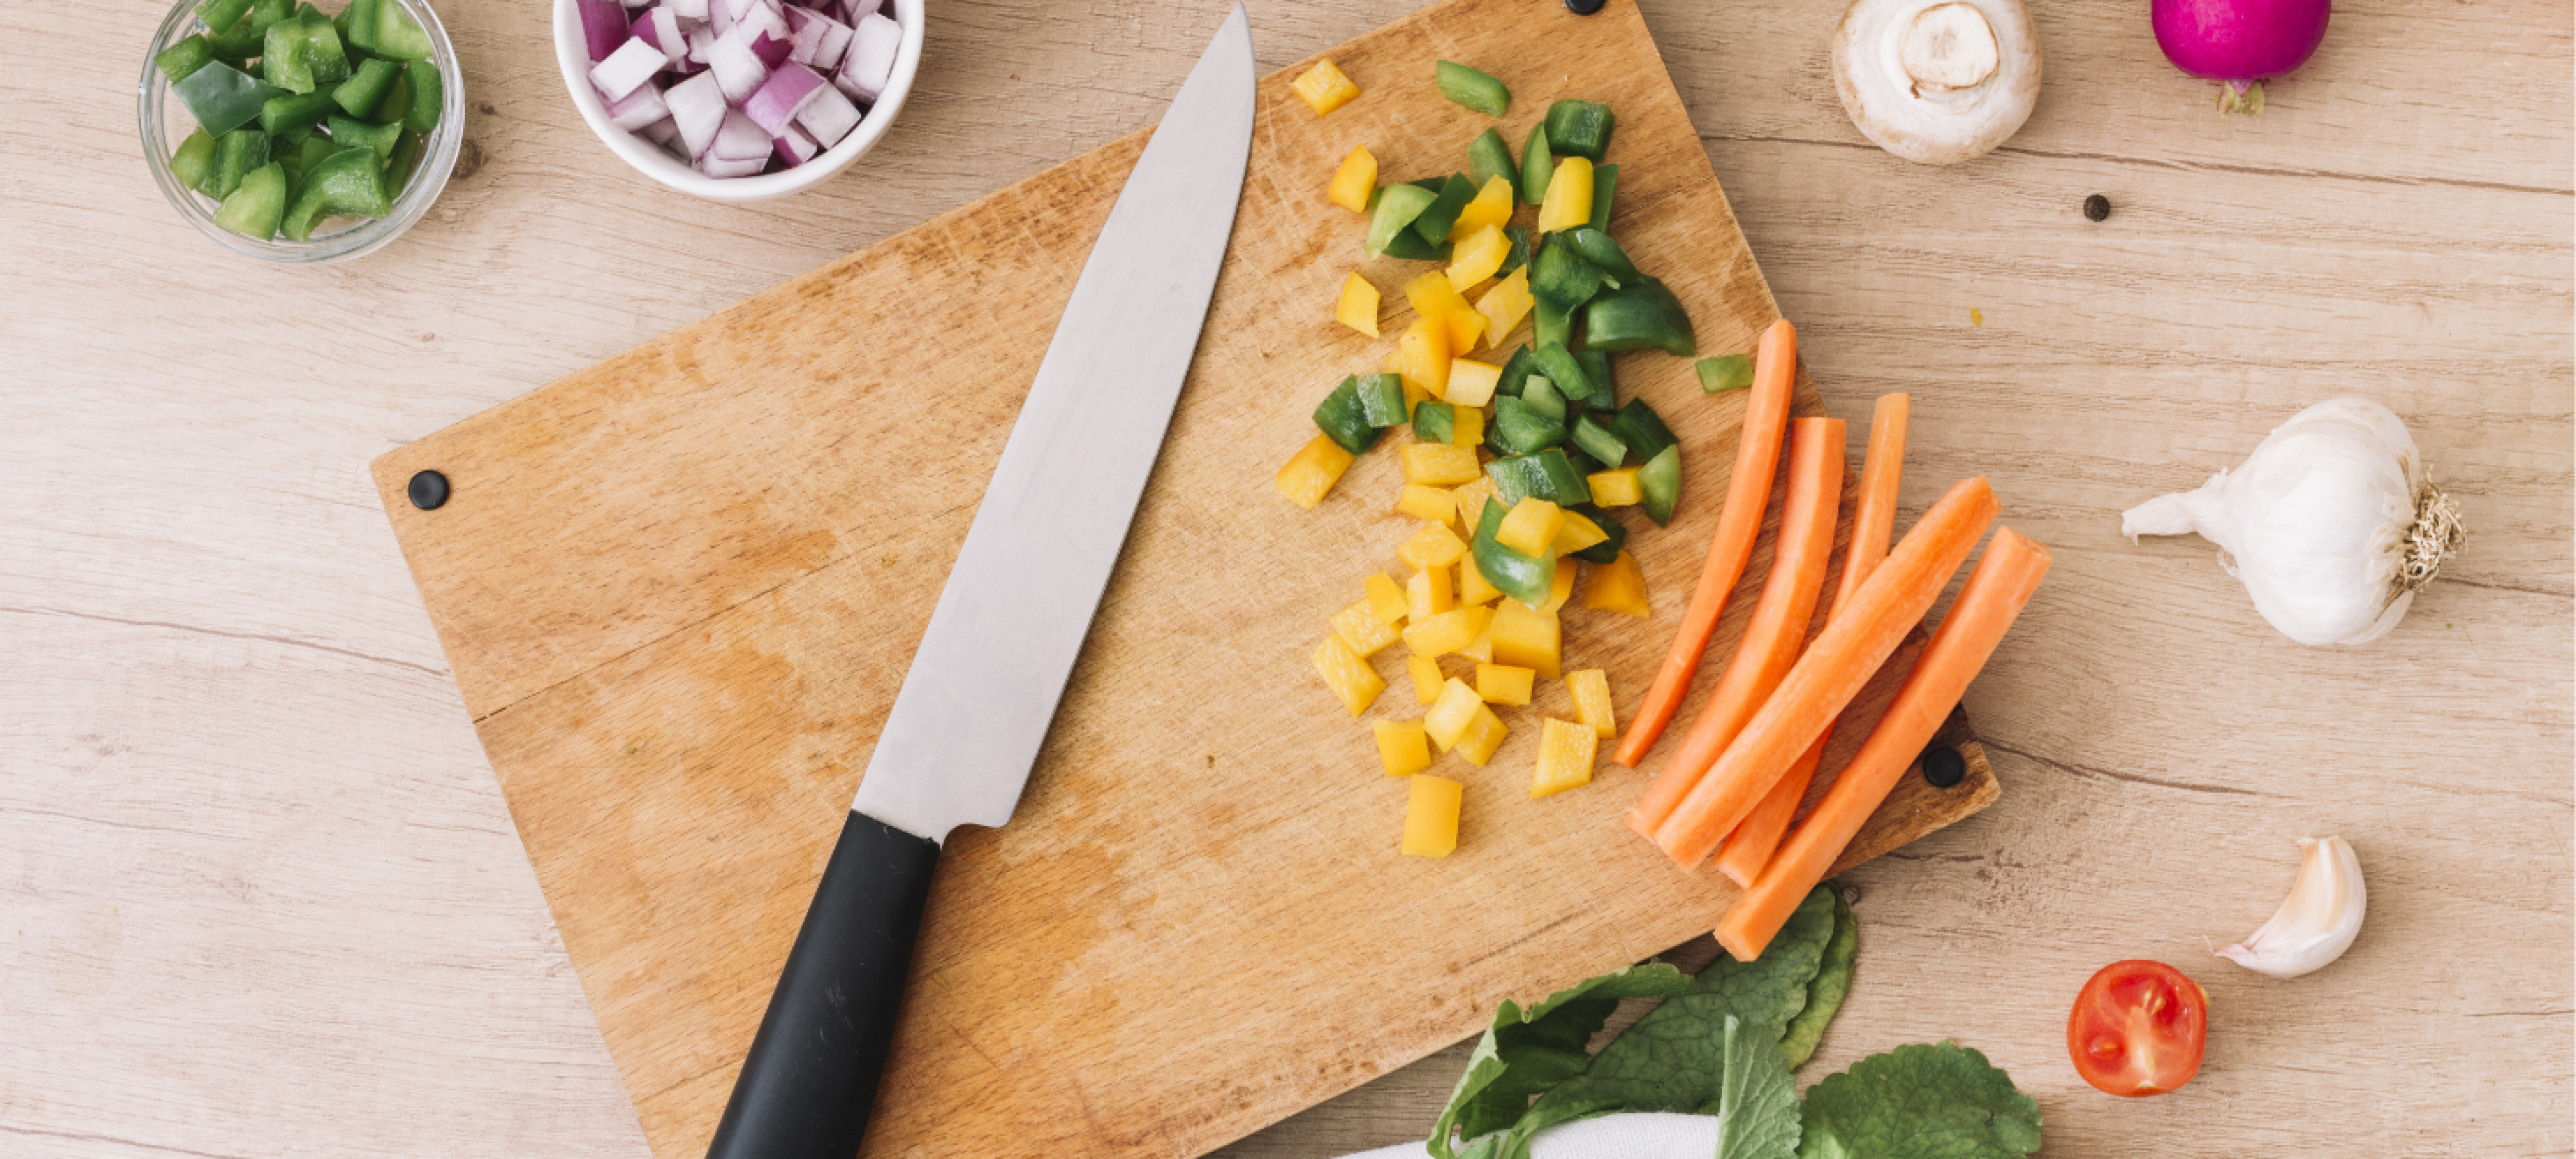 Knifier’s Vegetable Knife Buying Guide for Home Cooks & Professional Chefs